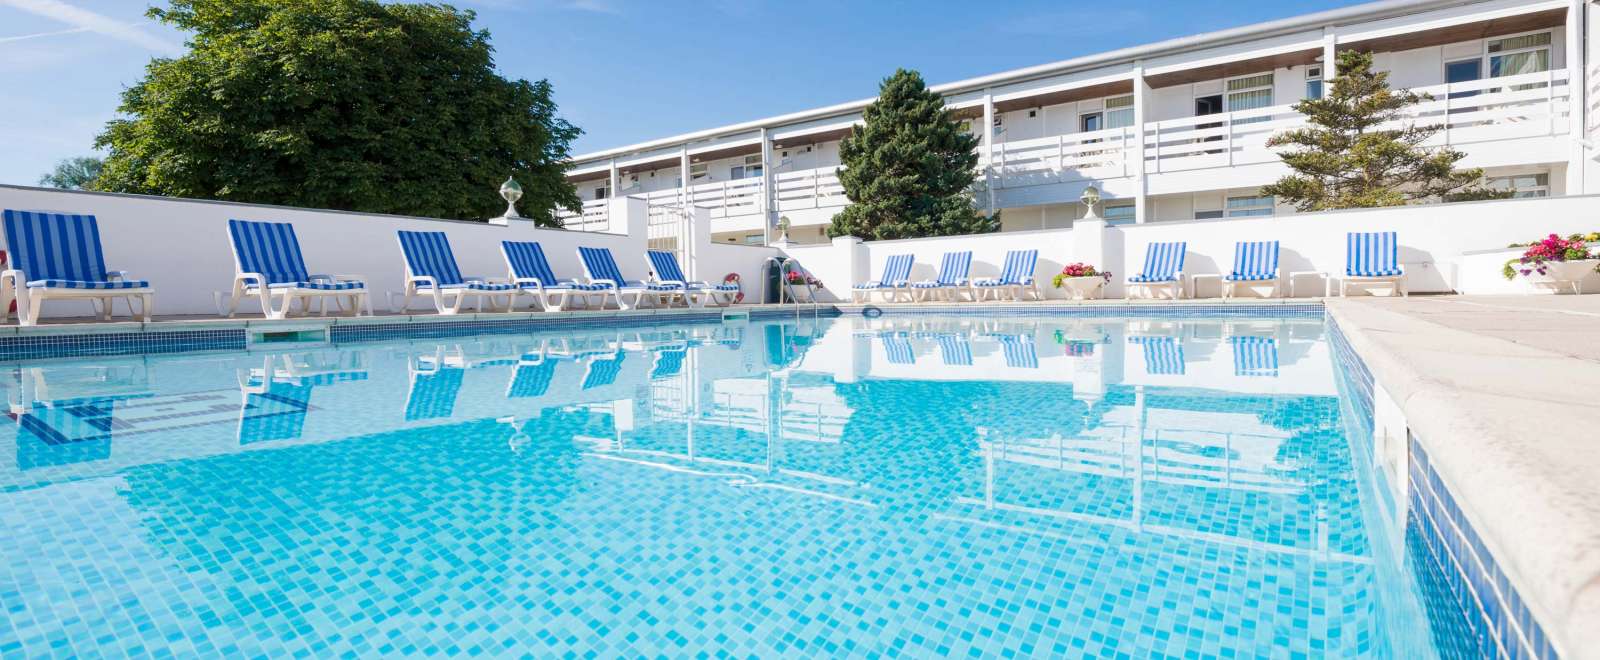 Barnstaple Hotel Outdoor Pool and Loungers